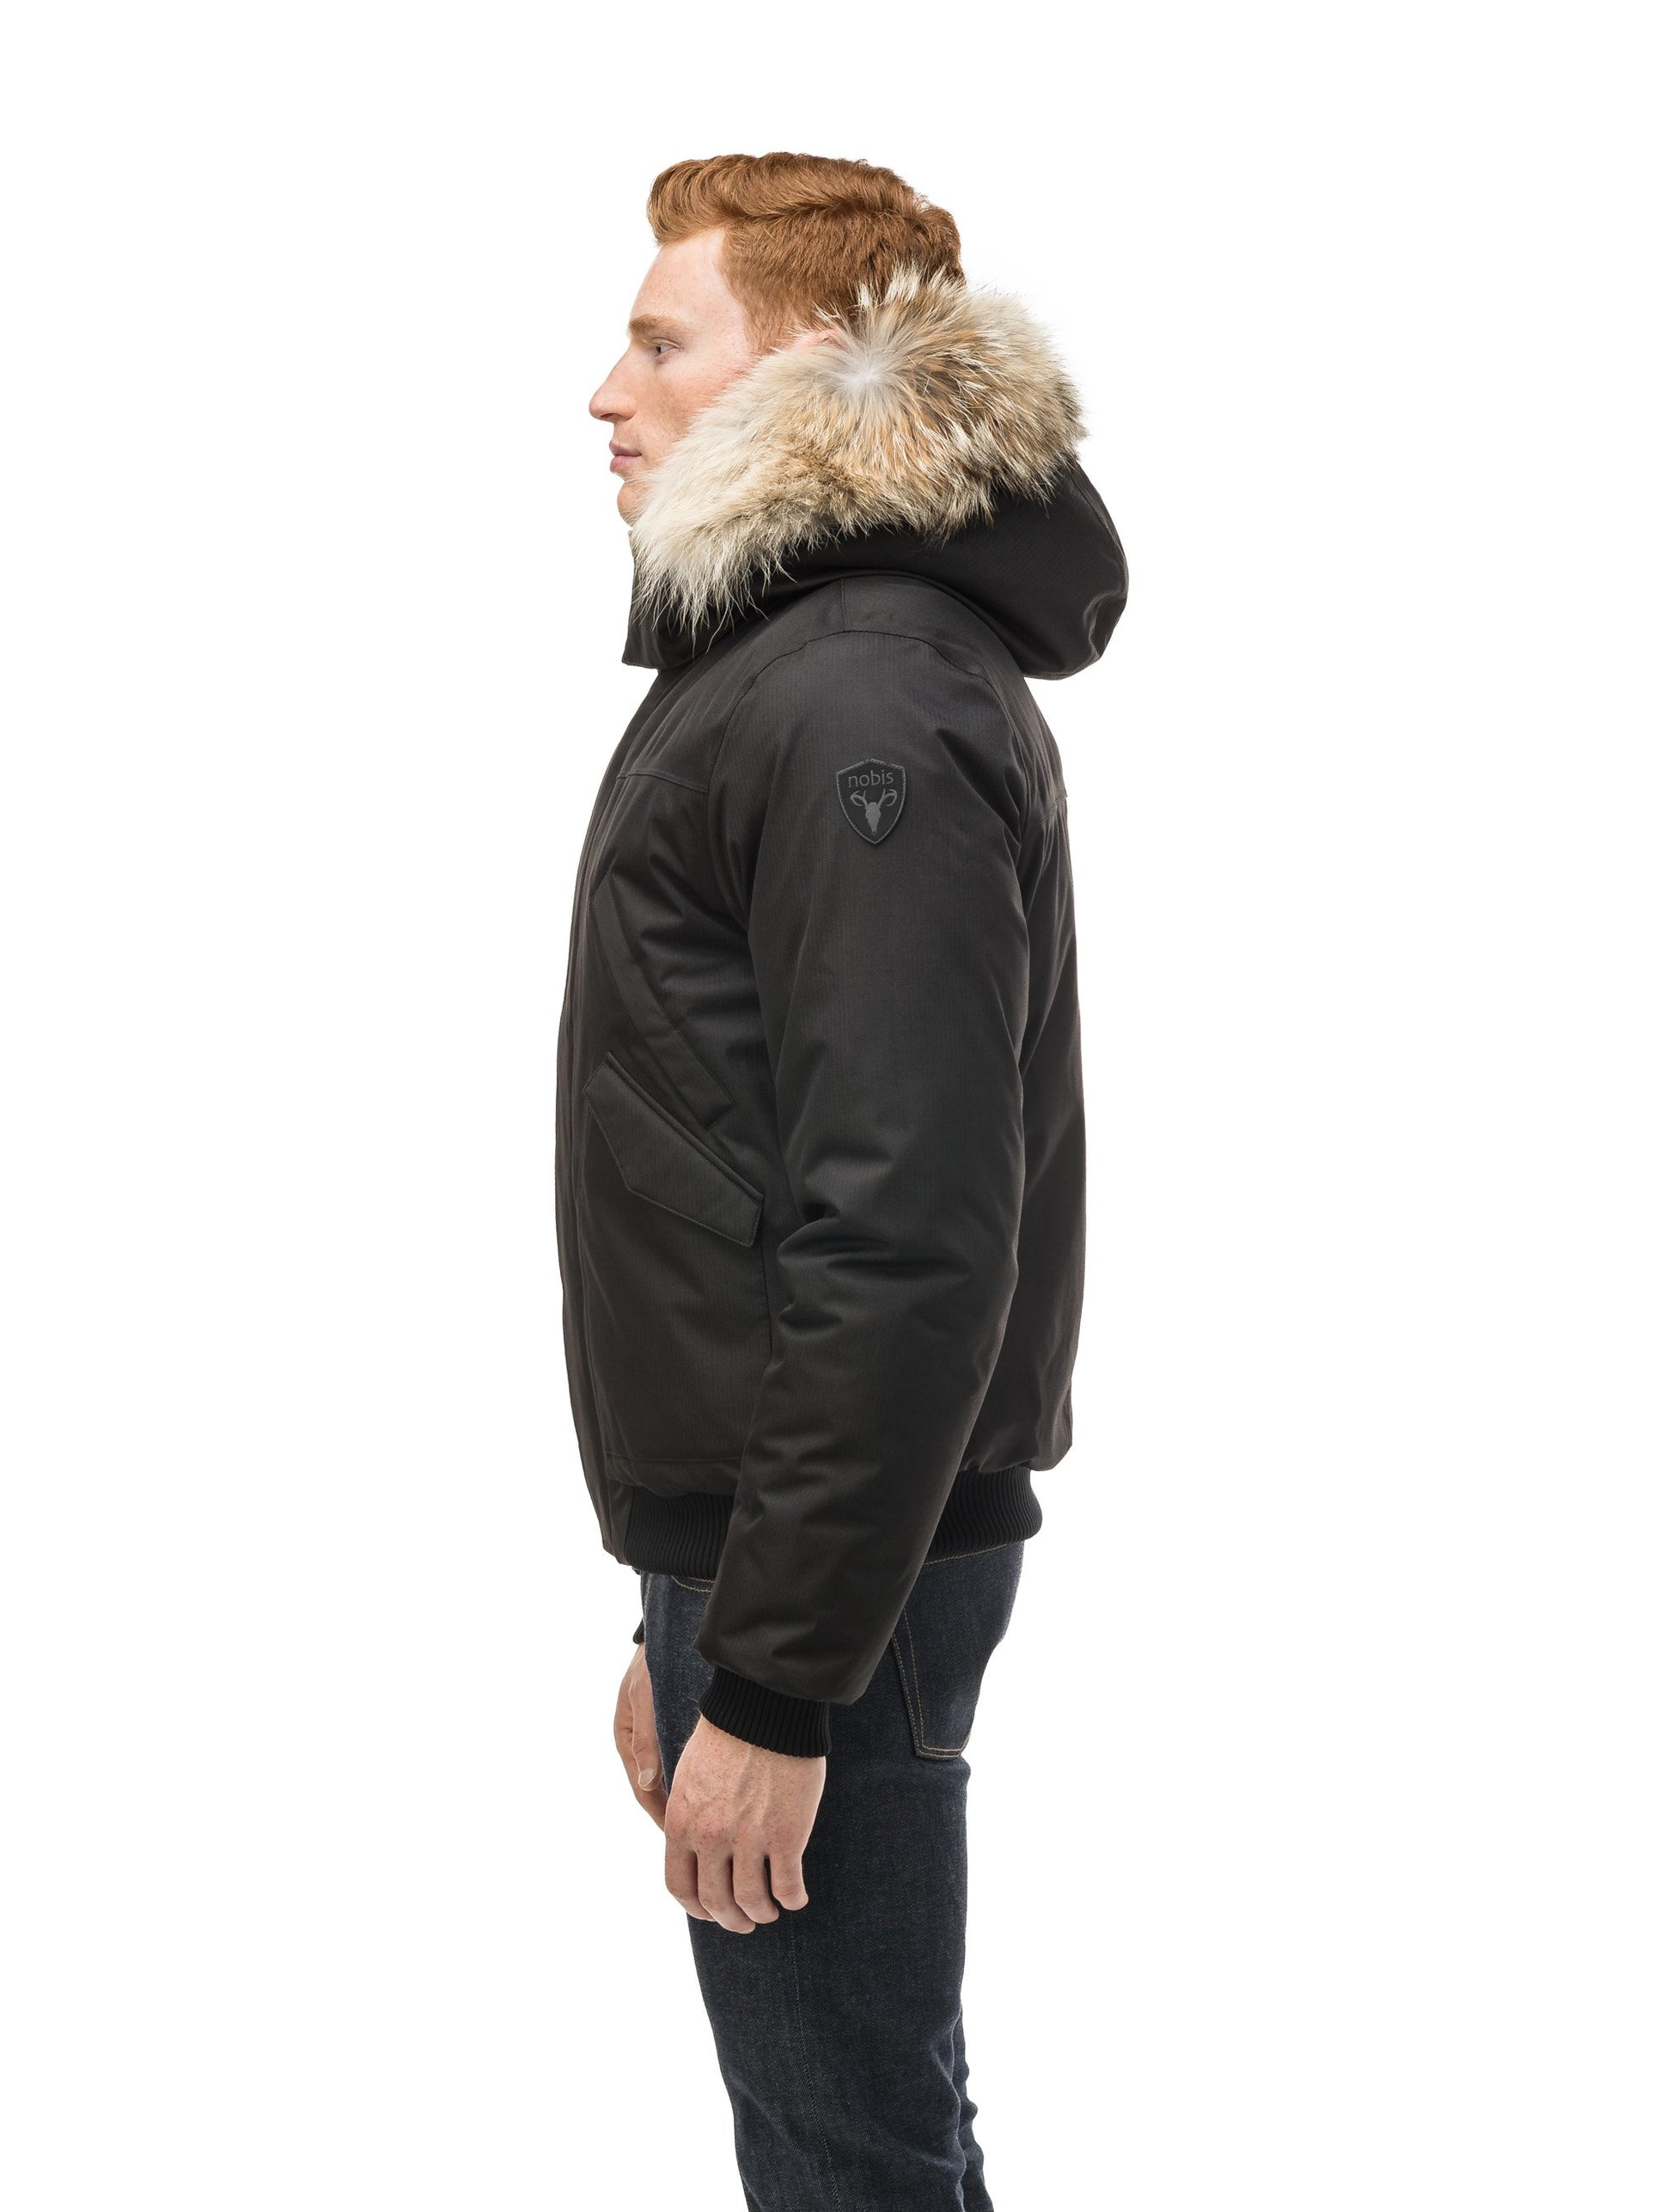 Men's classic down filled bomber jacket with a down filledÃ‚Â hood that features a removable coyote fur trim and concealed moldable framing wire in Black